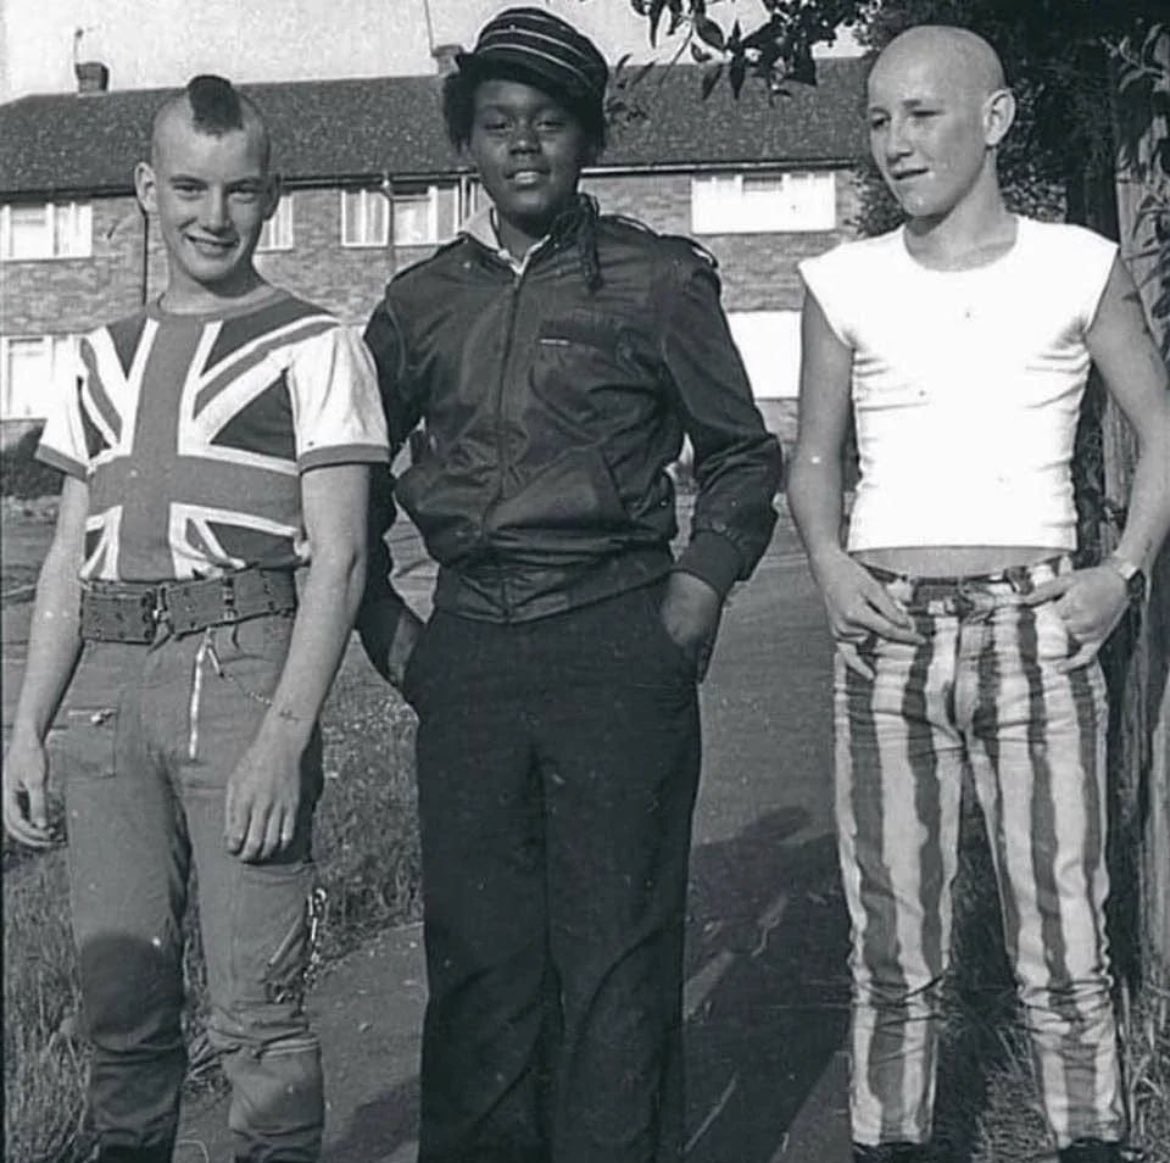 The United Kingdom witnessed the emergence of various distinct subcultures from the 1960s to the 1990s, characterized by their unique fashion, music, and attitudes. Let's delve into each subculture individually:

Punk subculture originated from the punk rock music scene, which…